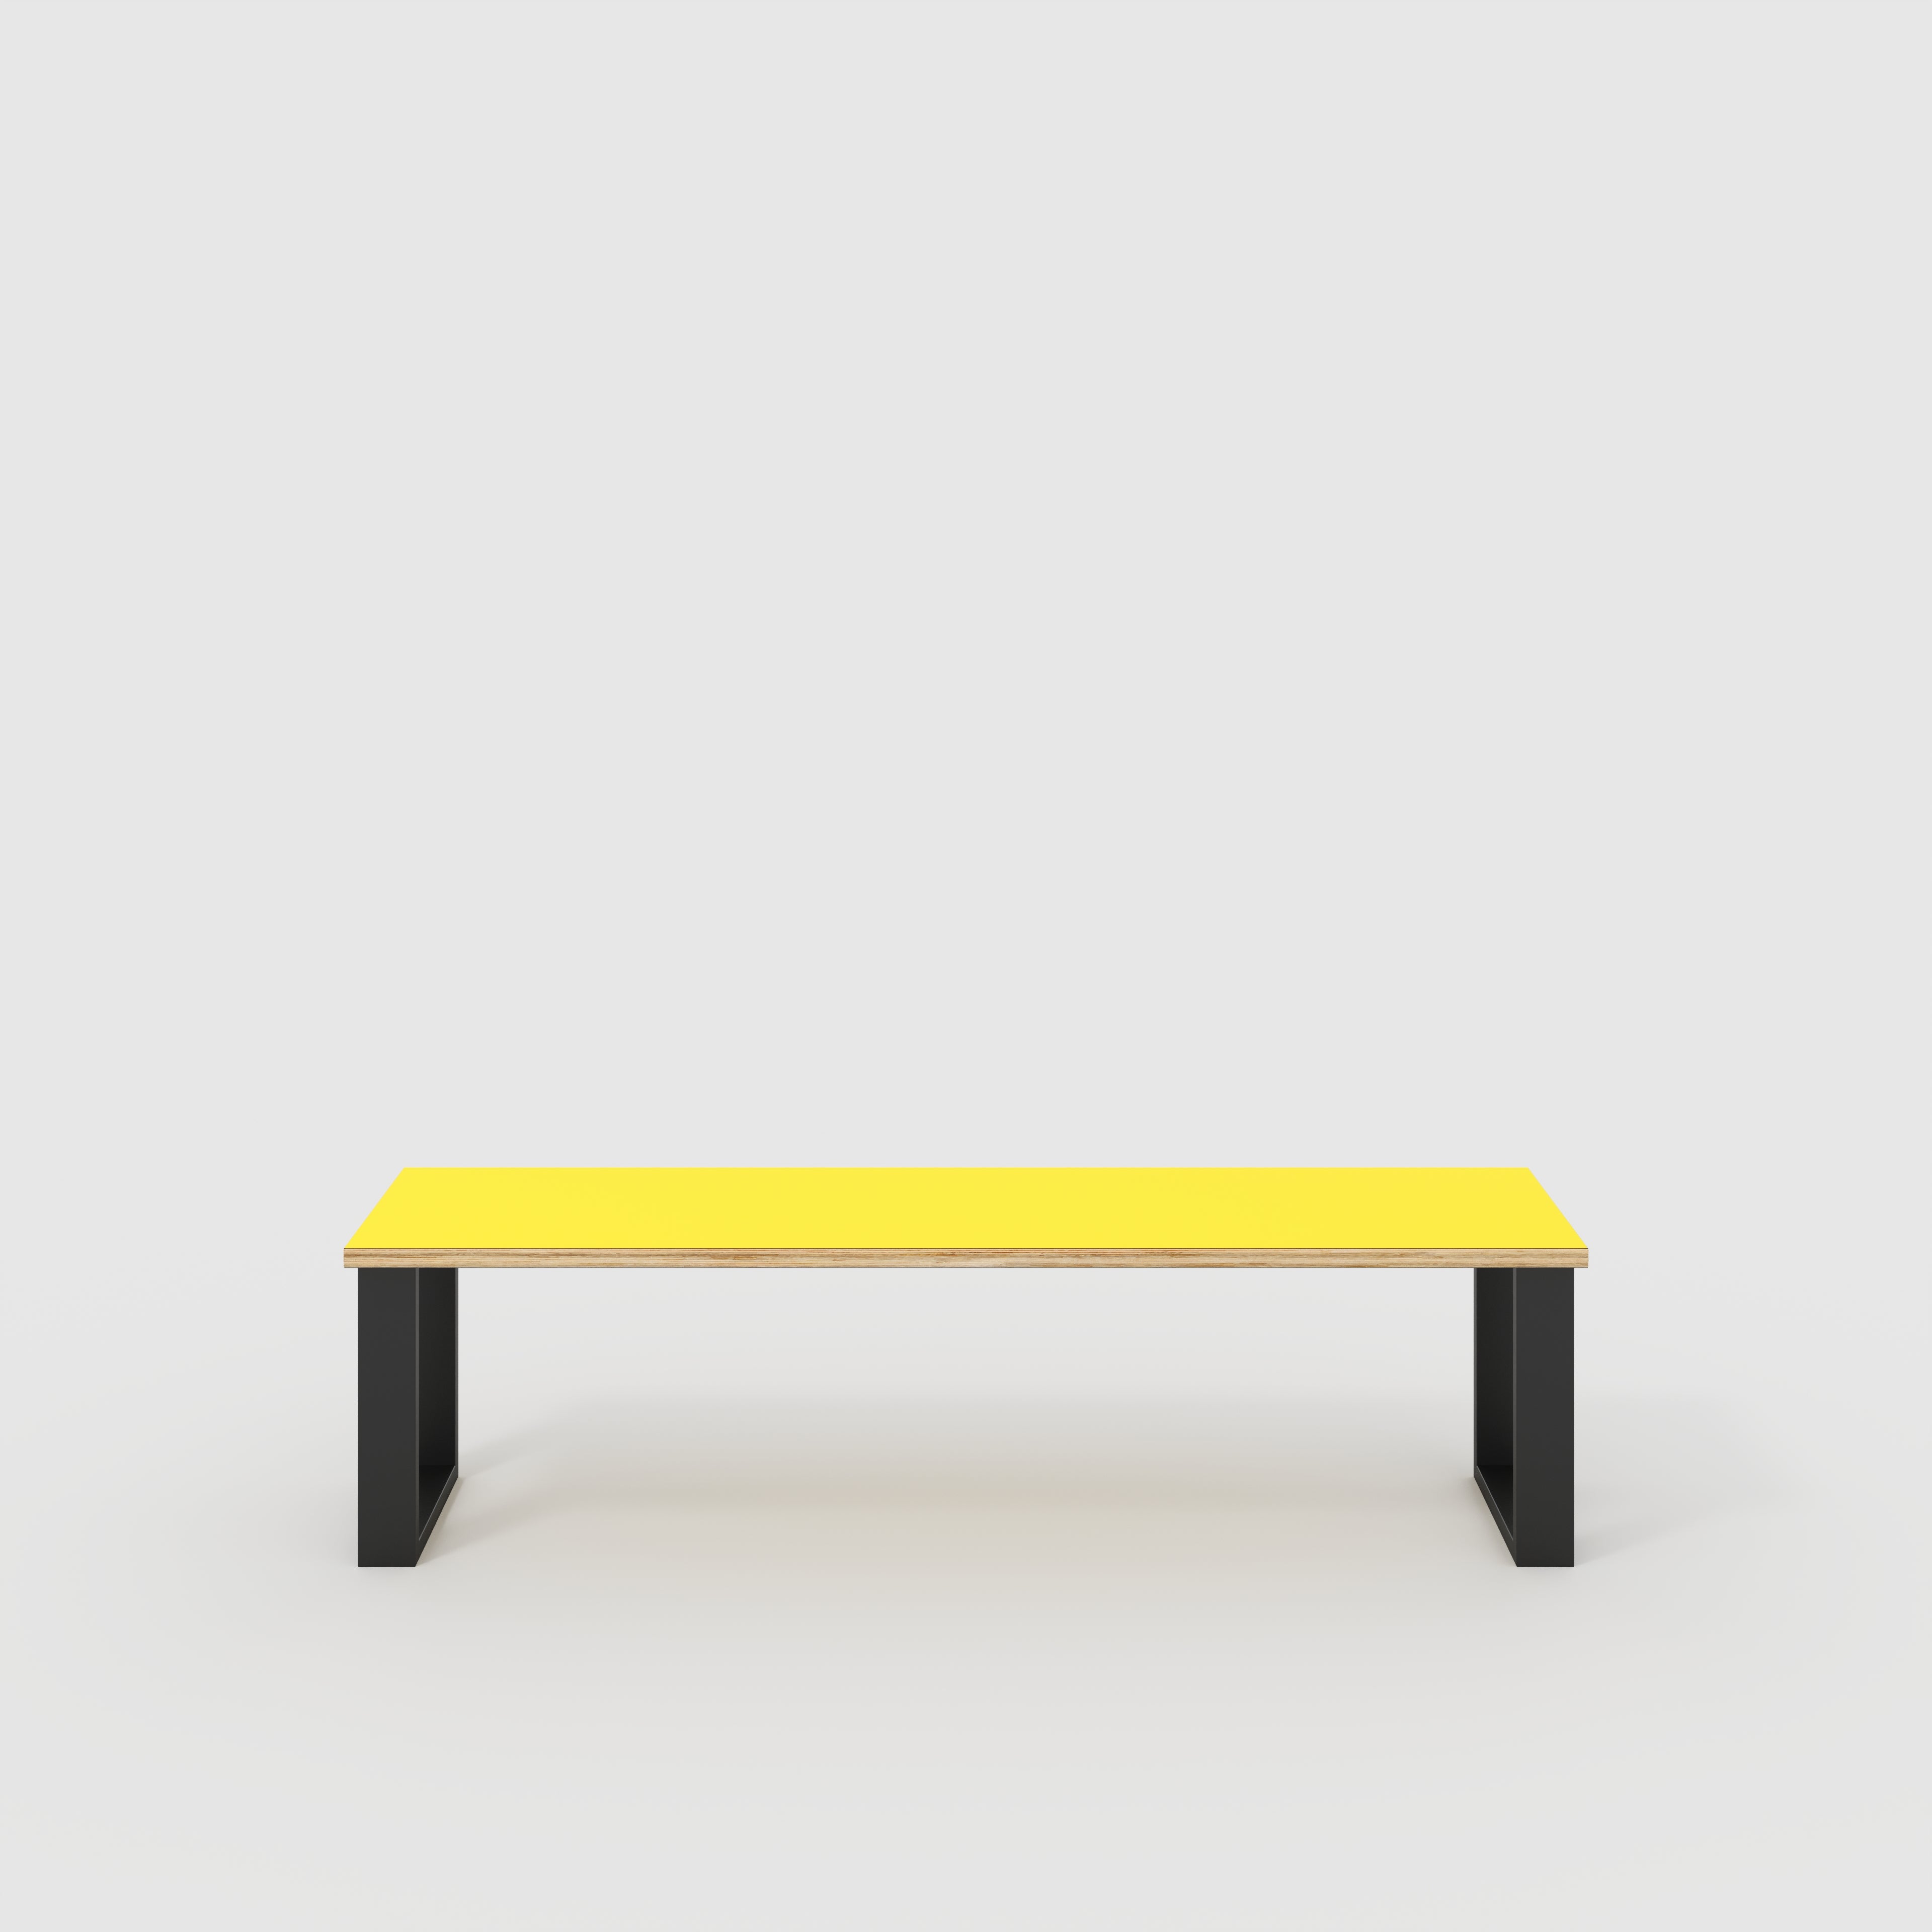 Bench Seat with Black Industrial Legs - Formica Chrome Yellow - 1600(w) x 400(d)